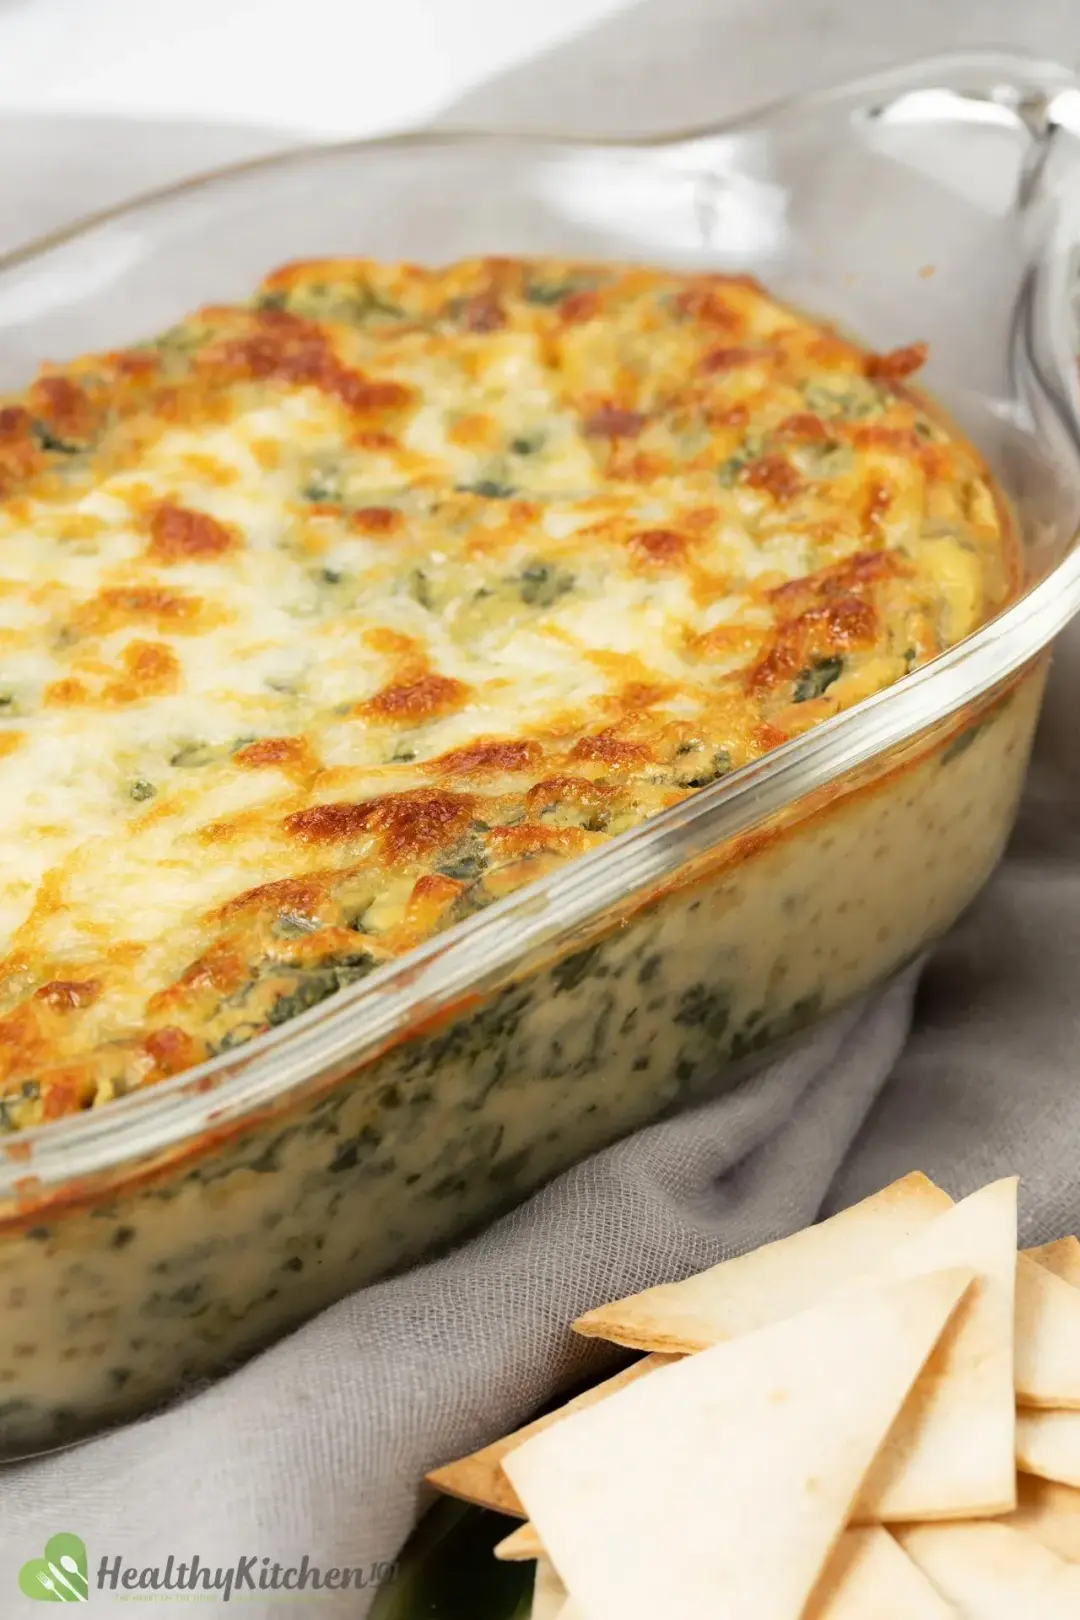 what goes well with spinach artichoke dip